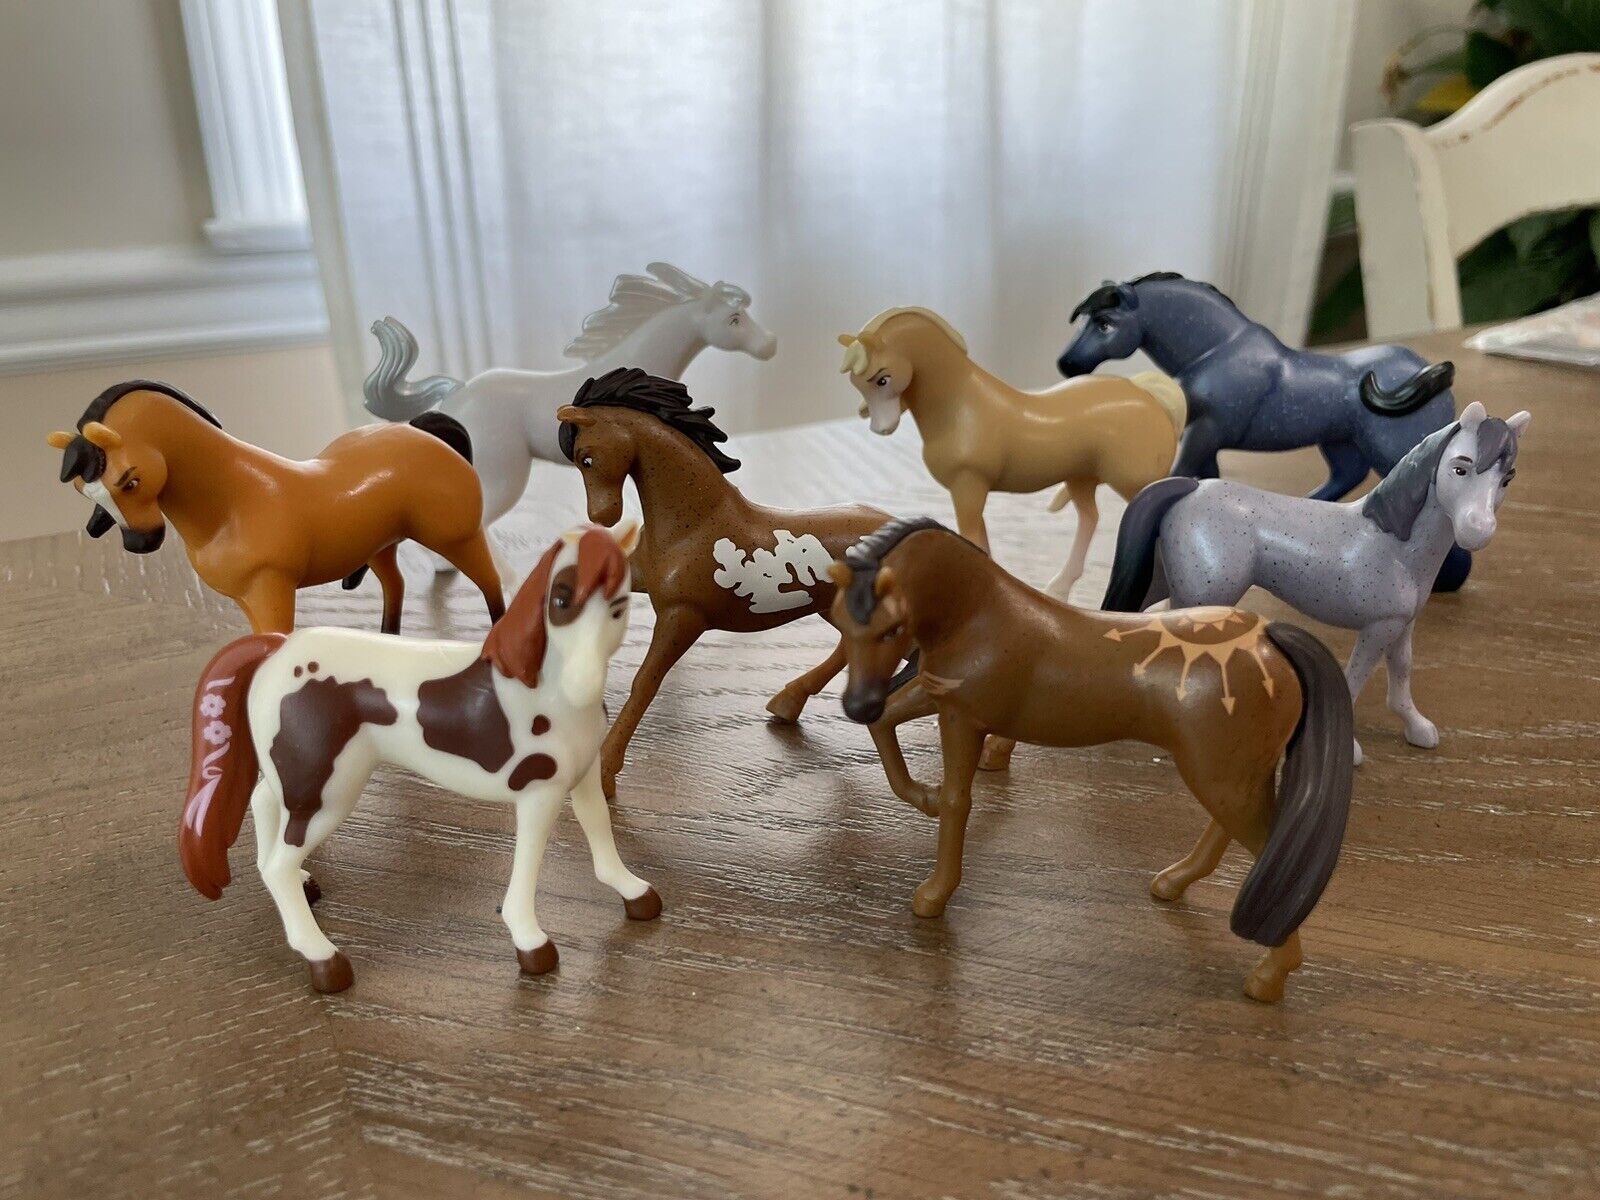 Lot 8 Small 2” Toy HORSES from Dreamworks SPIRIT 2017